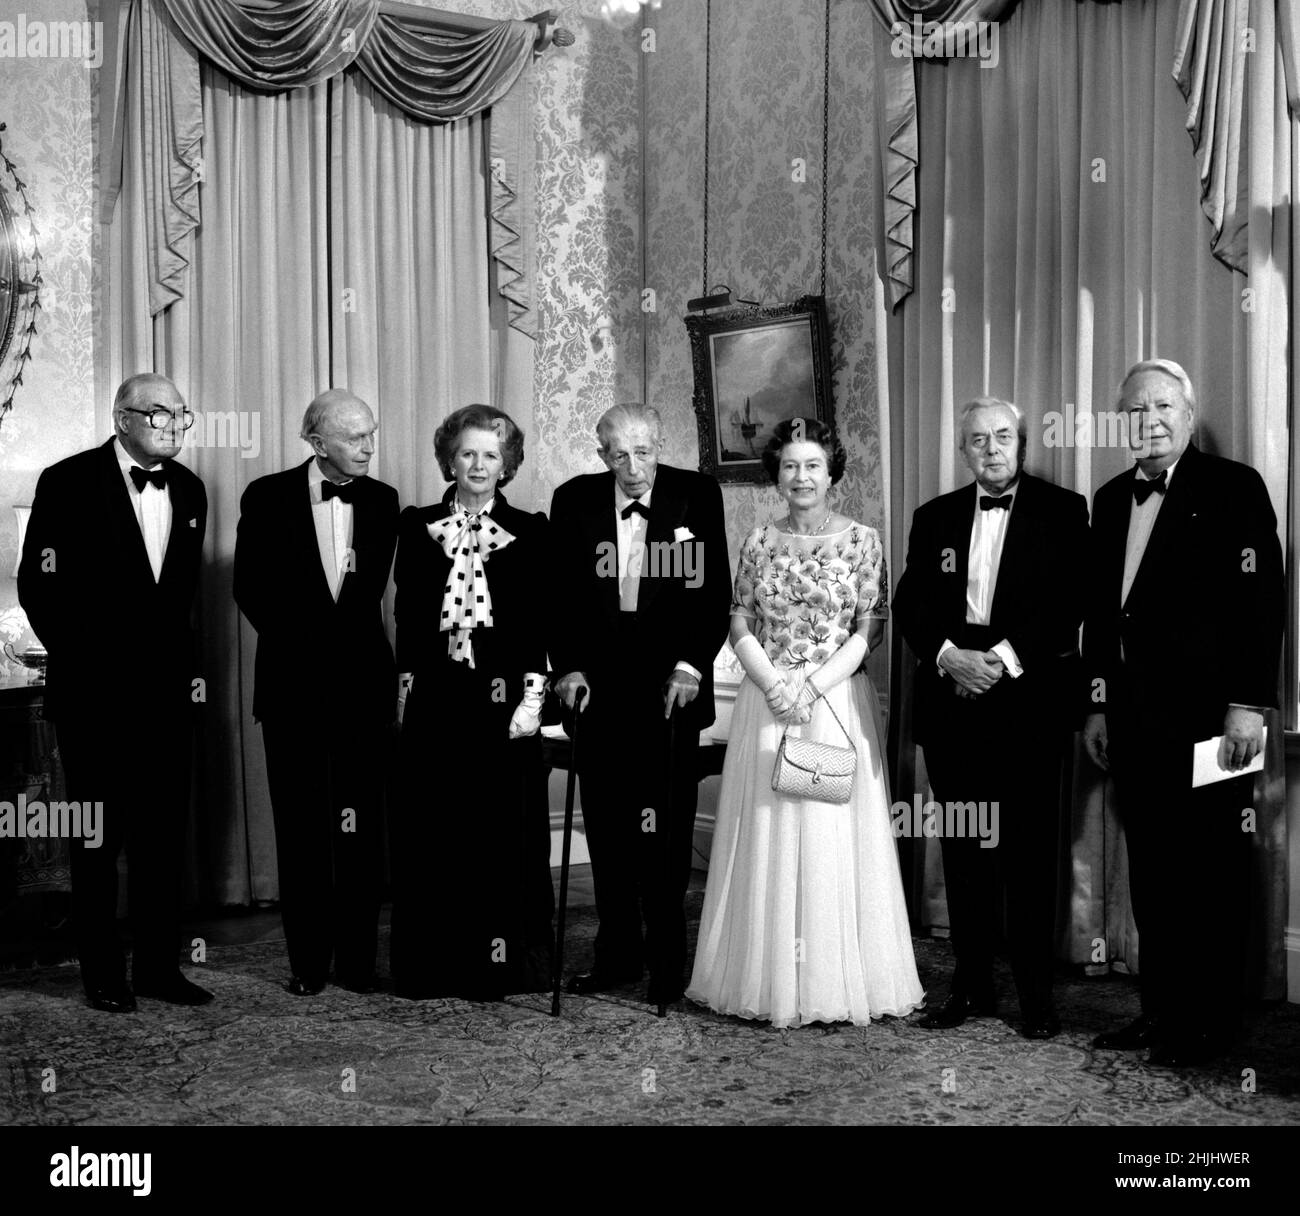 File photo dated 4/12/1985 of Margaret Thatcher joined by Queen Elizabeth II and five former PMs at 10 Downing Street, London, as the PM hosted a dinner celebrating the 250th anniversary of the residence becoming the London home of Prime Ministers. (L-R) James Callaghan, Lord Home, Harold Macmillan, MargaretThatcher, Lord Stockton, the Queen, Lord Wilson and Edward Heath. Issue date: Sunday January 30, 2022. Stock Photo